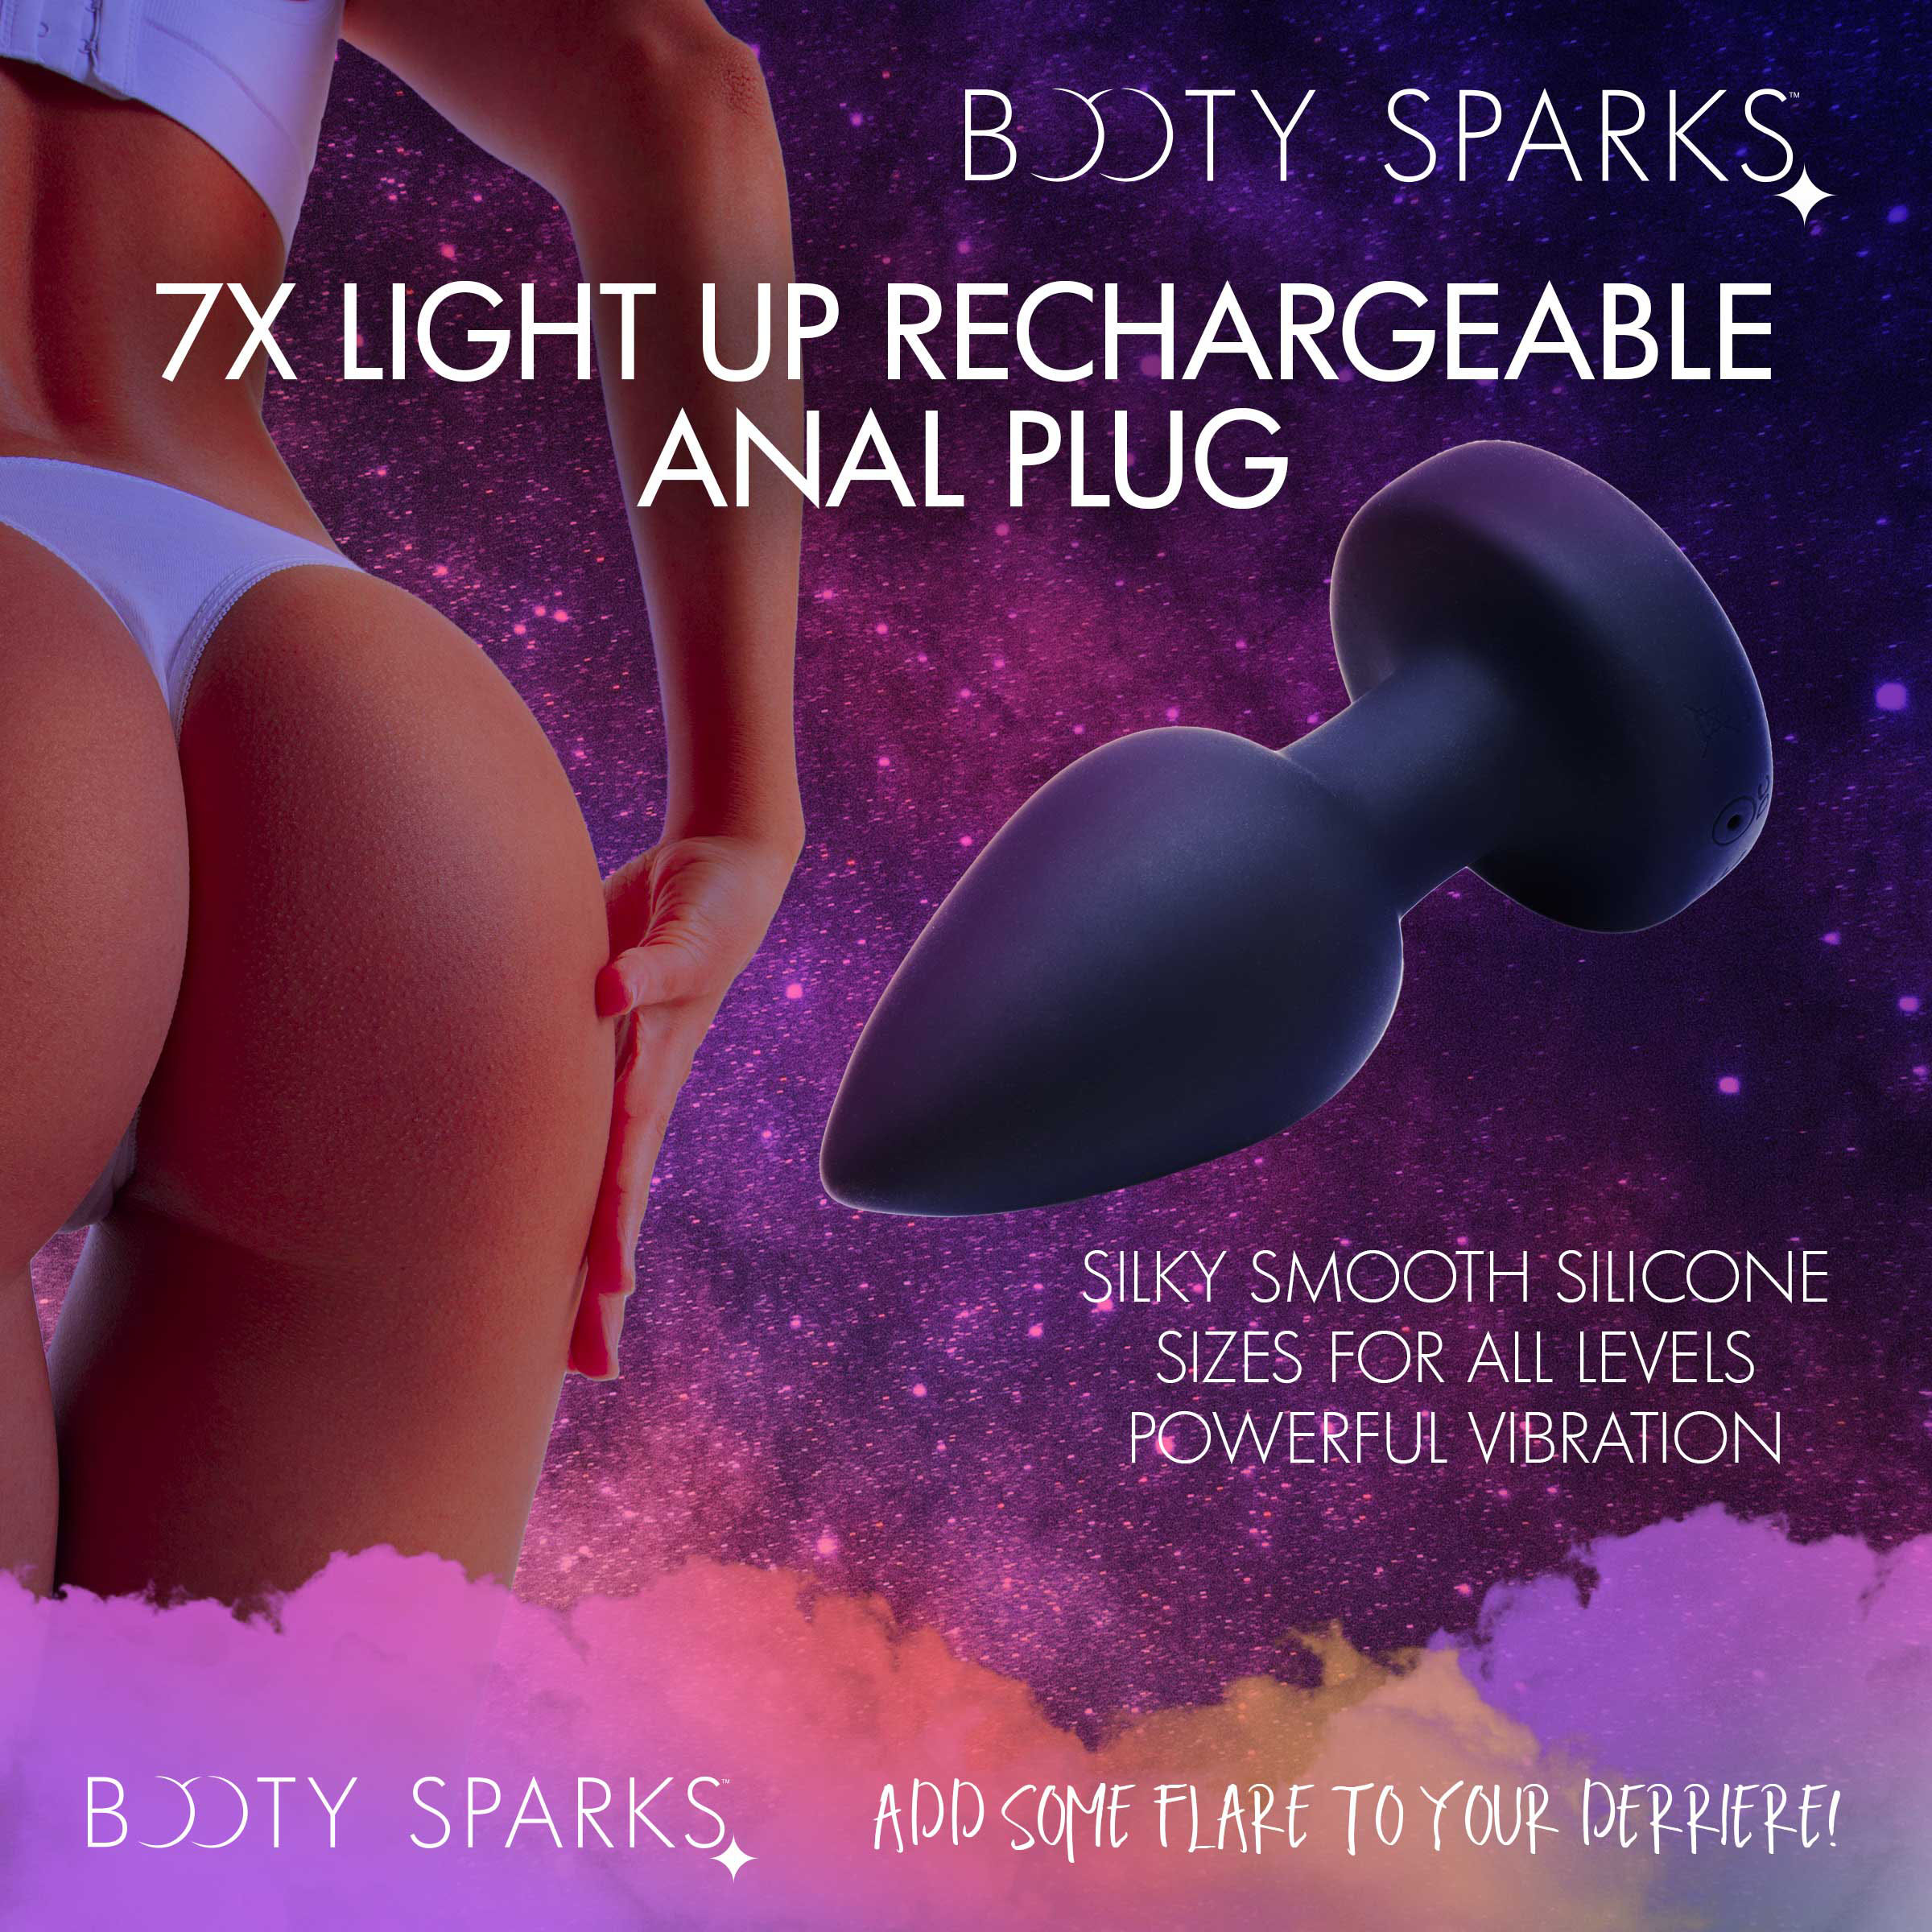 7X Light Up Rechargeable Anal Plug – Large